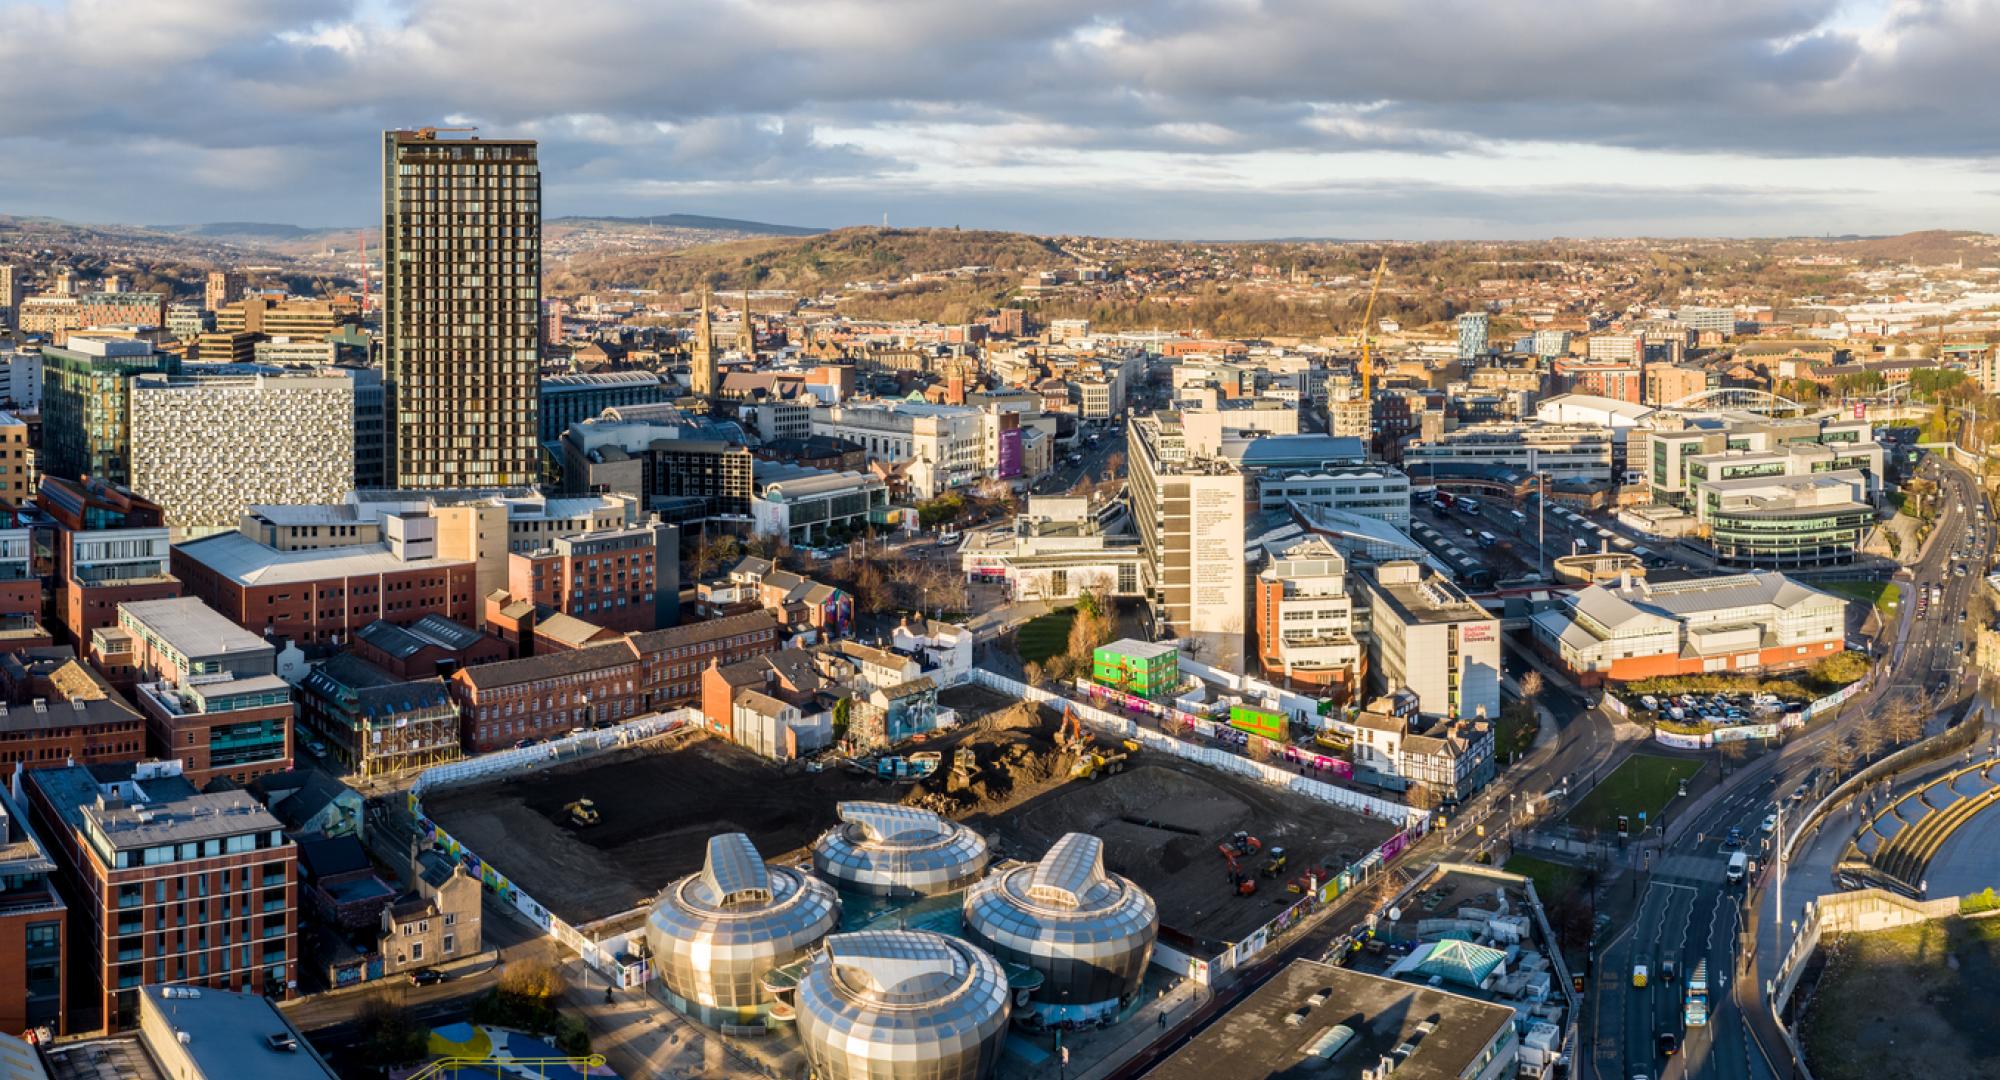 Aerial view of Sheffield city centre